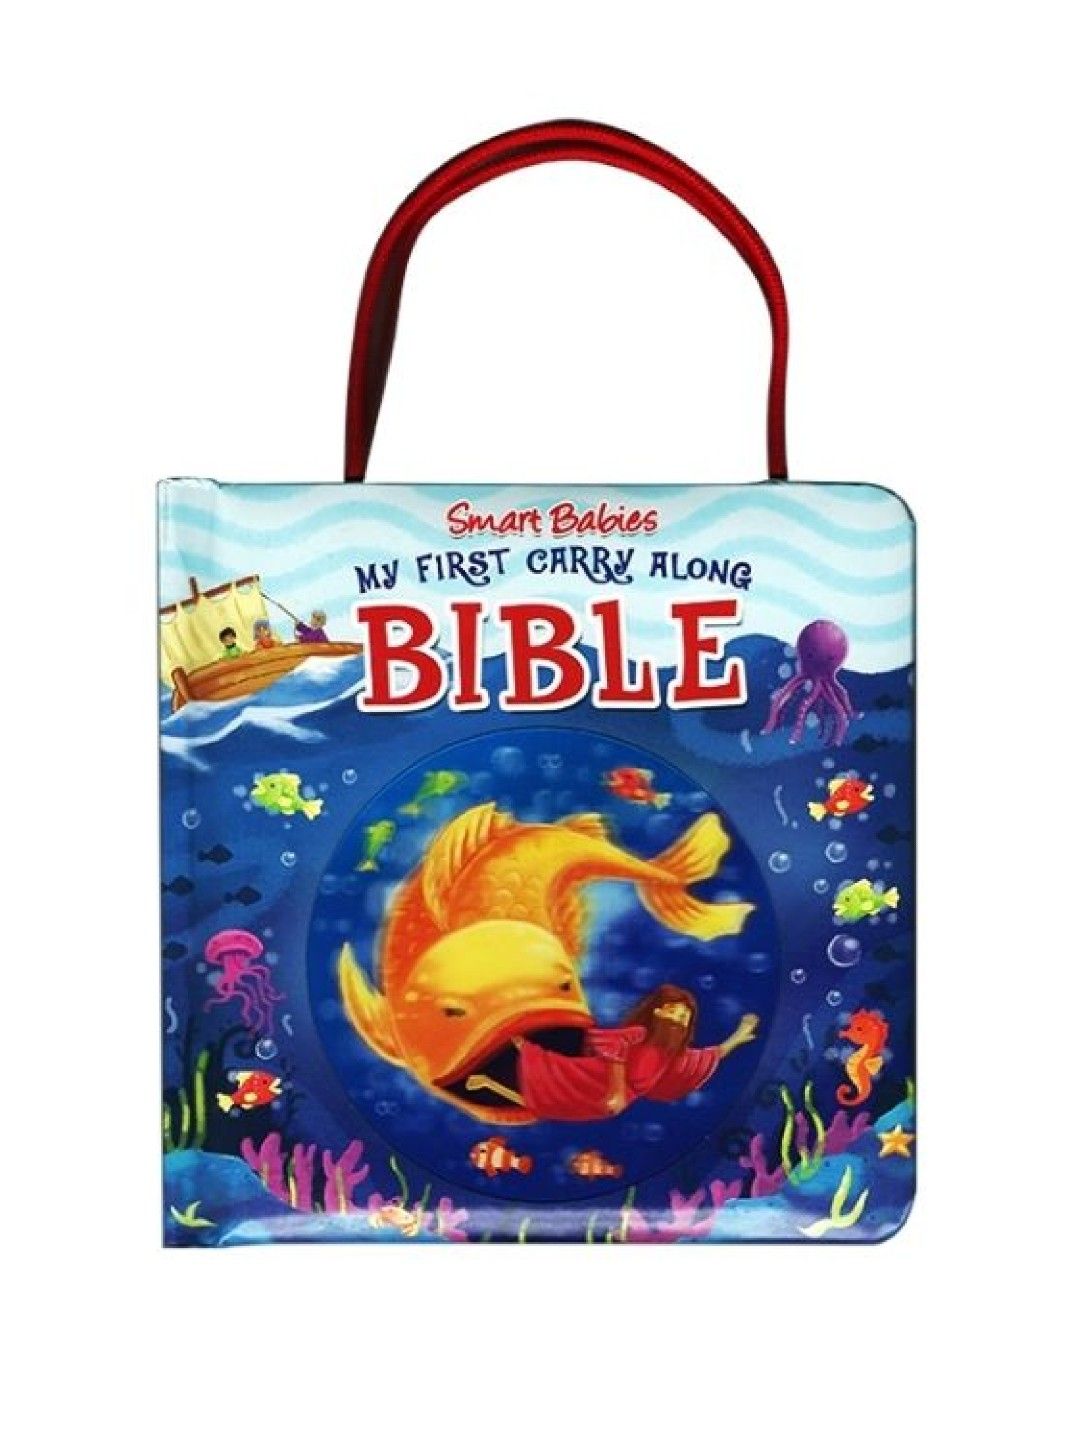 Learning is Fun Smart Babies My First Carry Along Bible